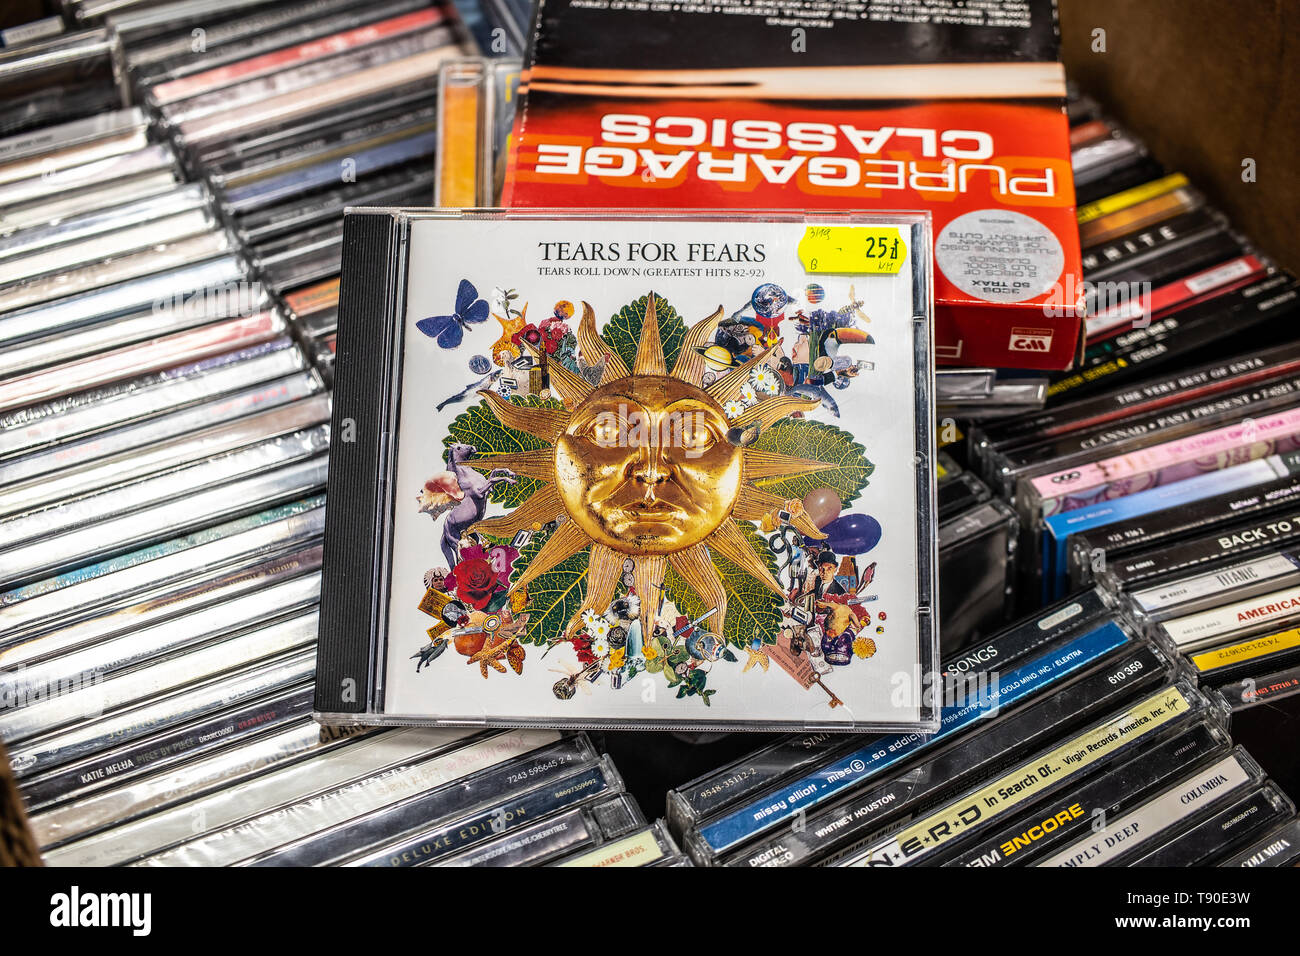 Nadarzyn, Poland, May 11, 2019: Tears for Fears CD album Tears Roll Down (Greatest Hits 82-92) on display for sale, famous English pop rock band Stock Photo